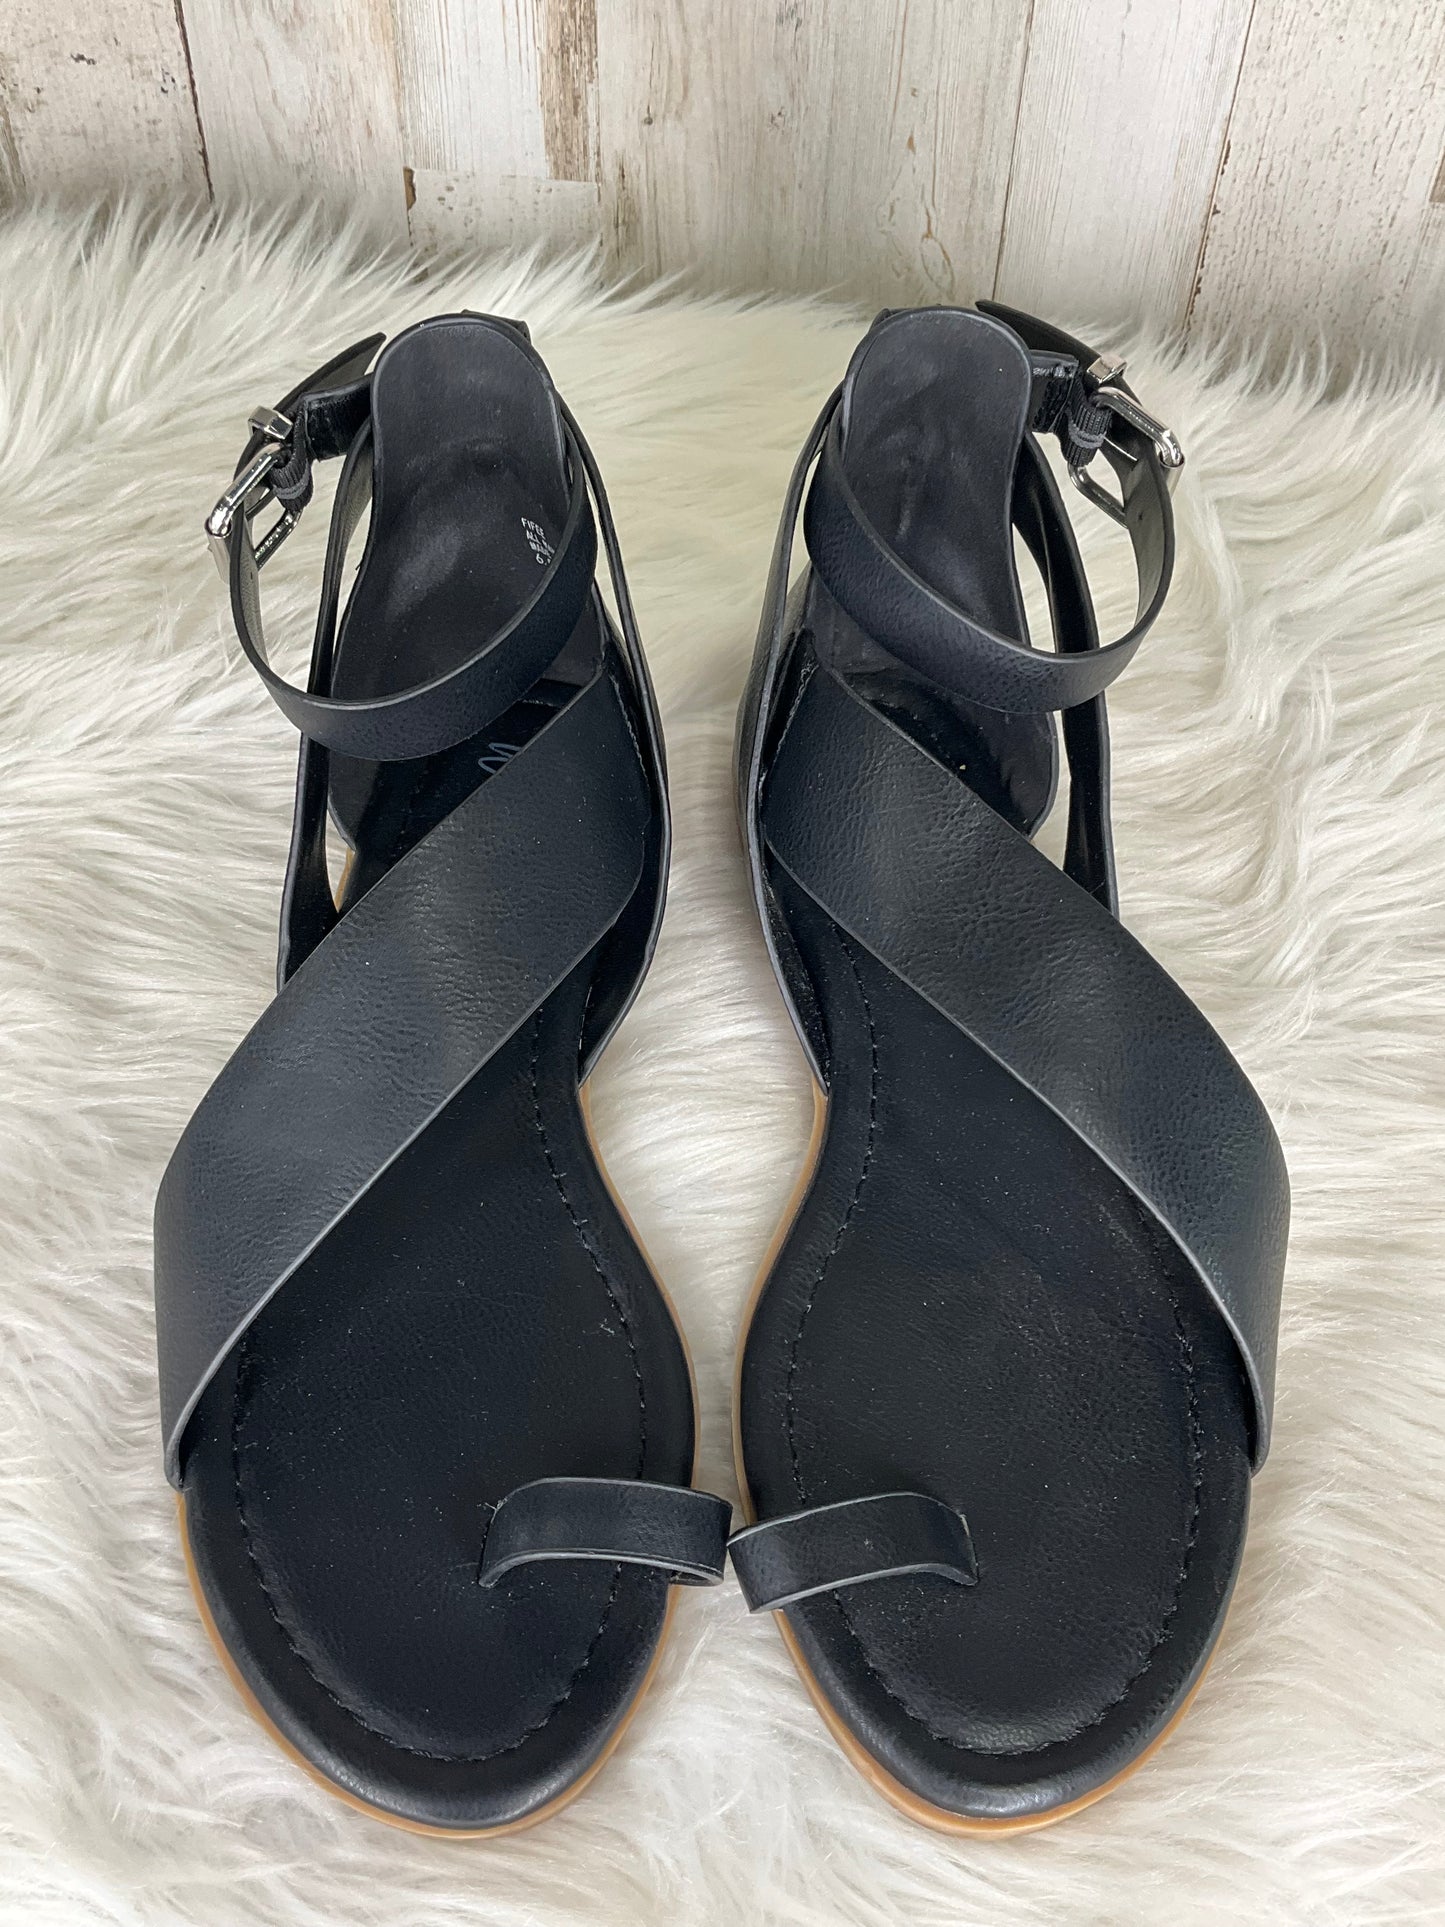 Sandals Flats By Wonderly  Size: 6.5